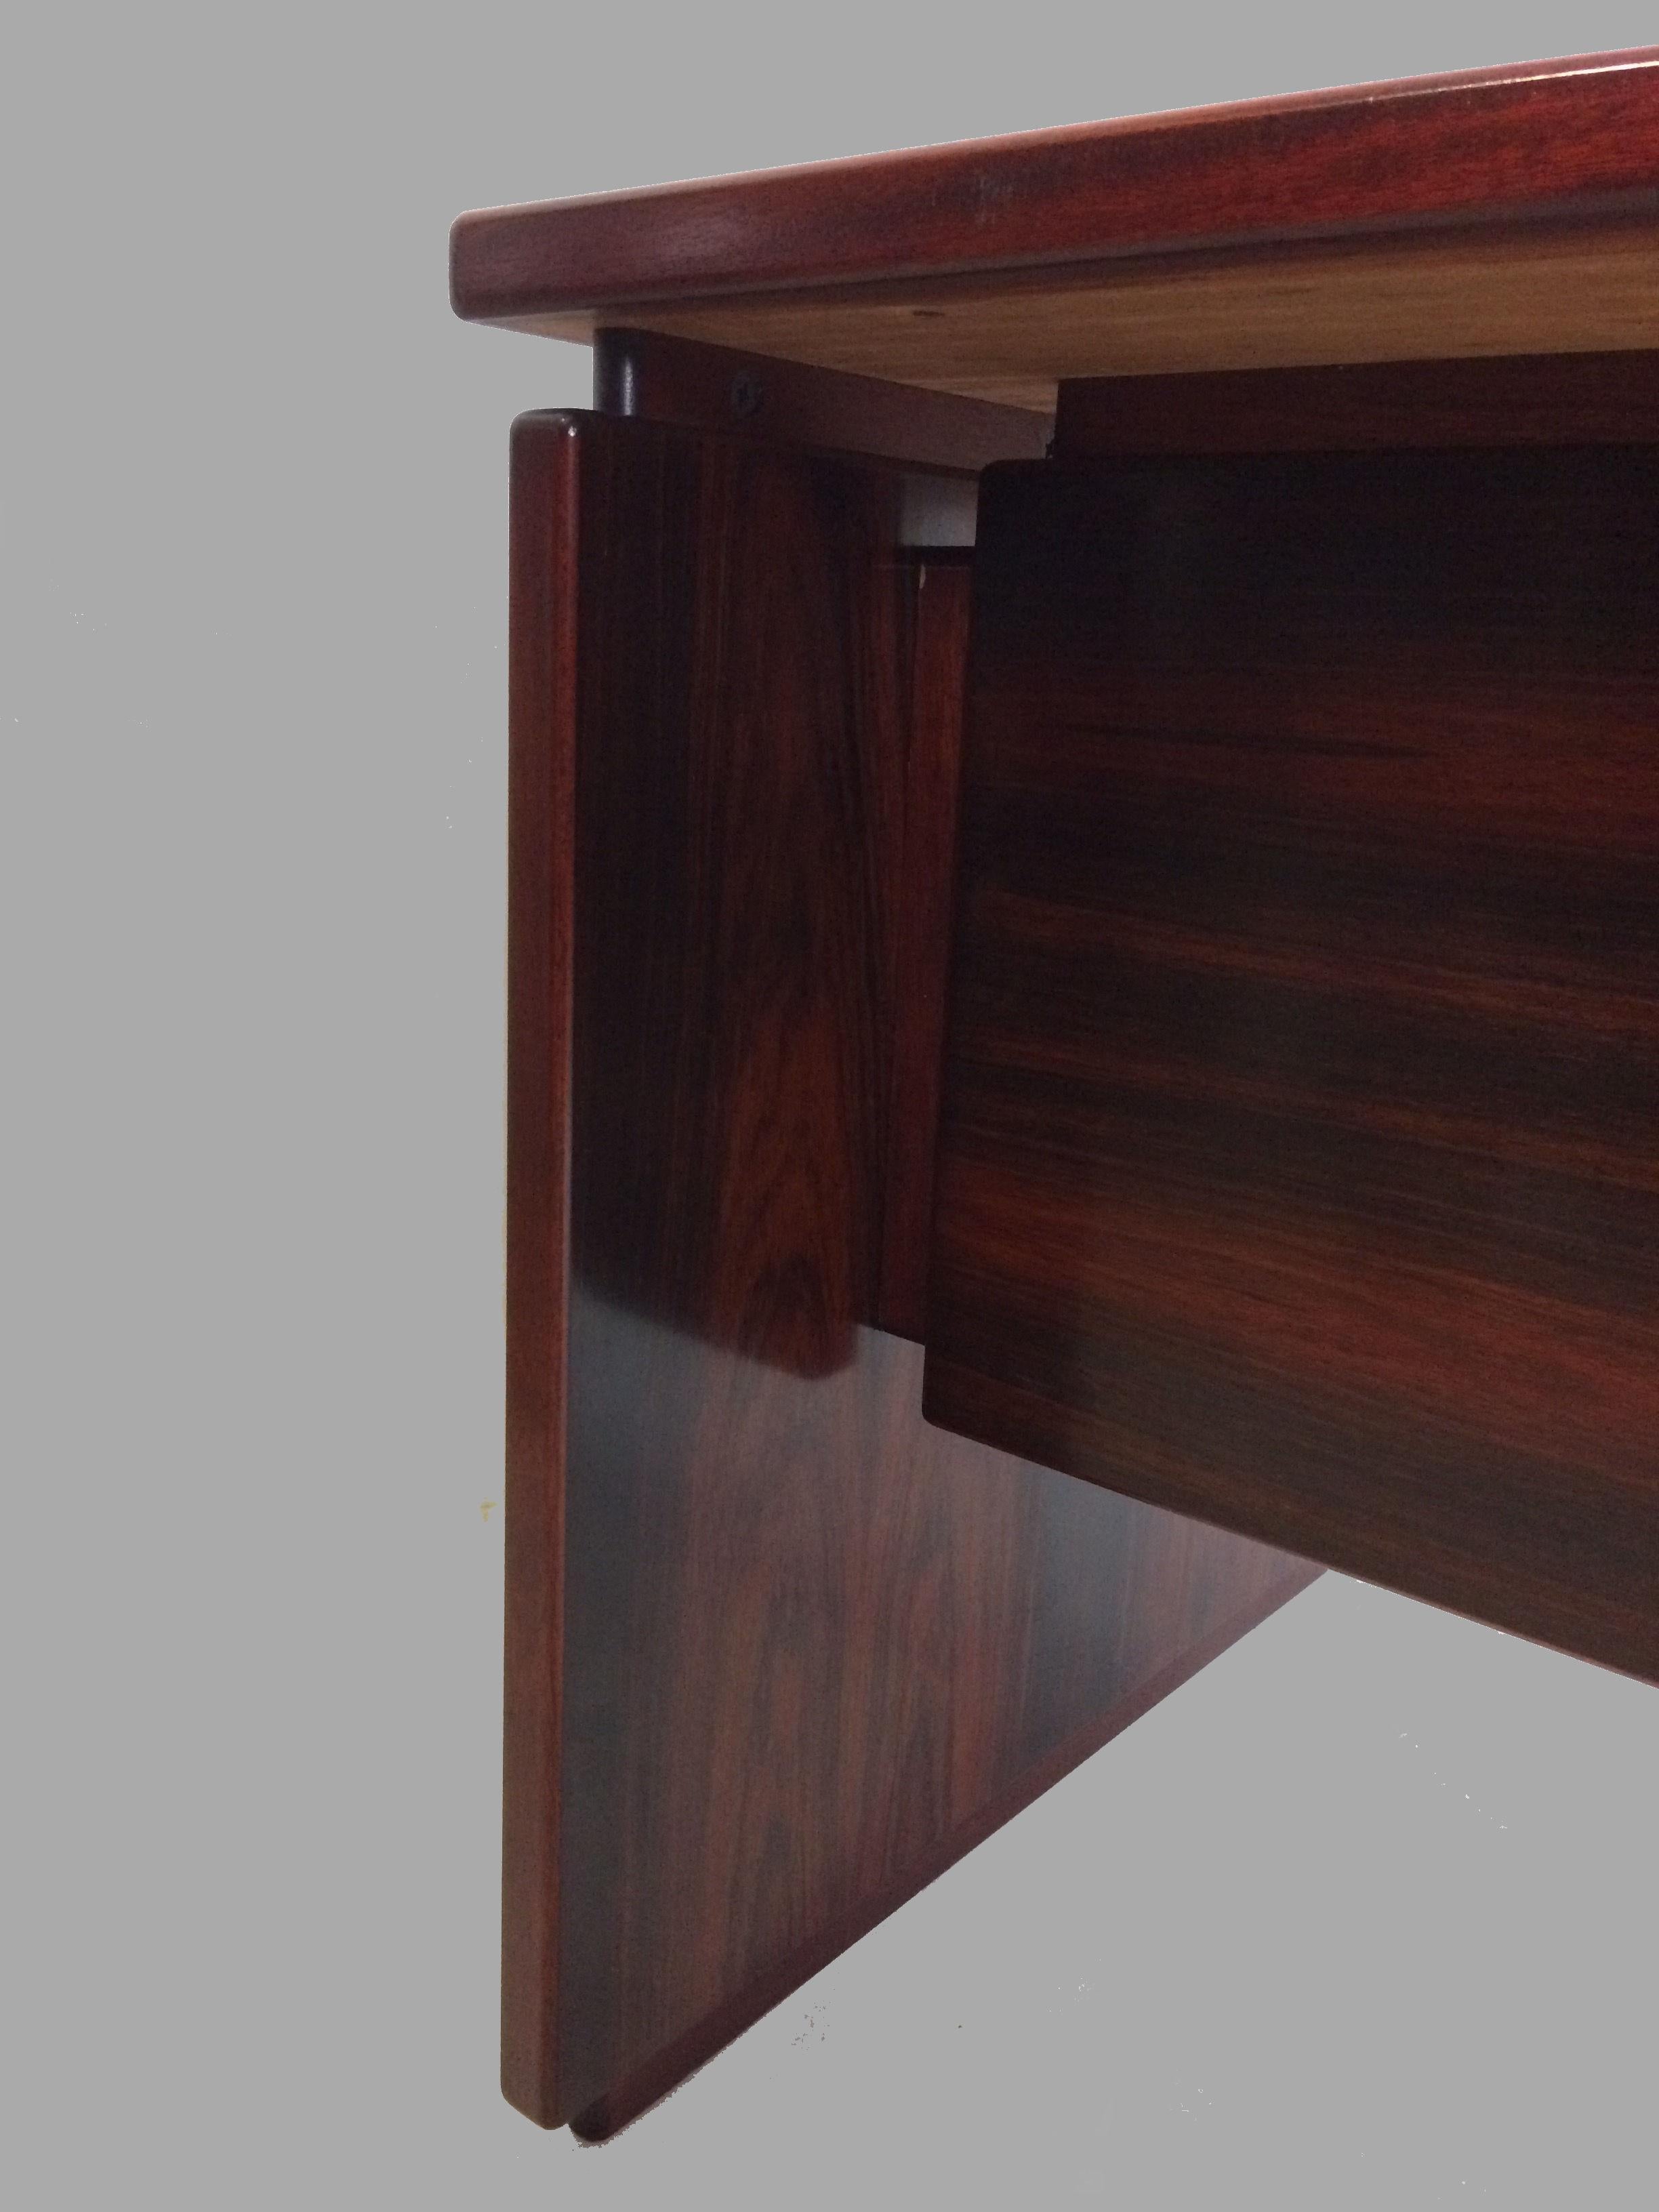 1990s Excecutive Desk in Rosewood by Bent Silberg for Bent Silberg Mobler 2